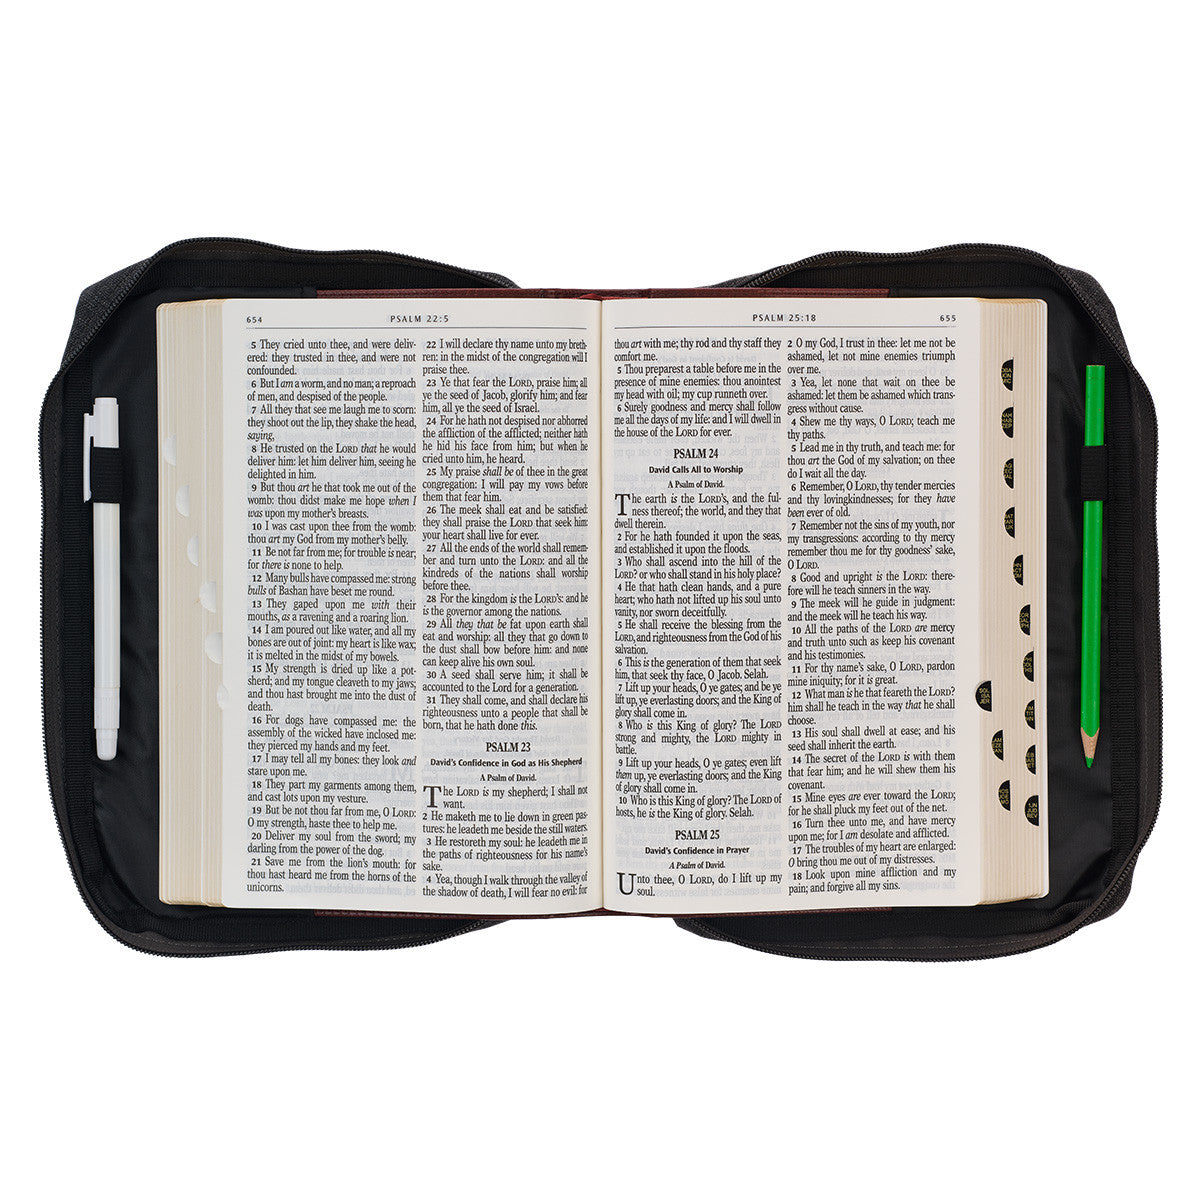 Hope in the LORD Charcoal Value Bible Cover - Isaiah 40:31